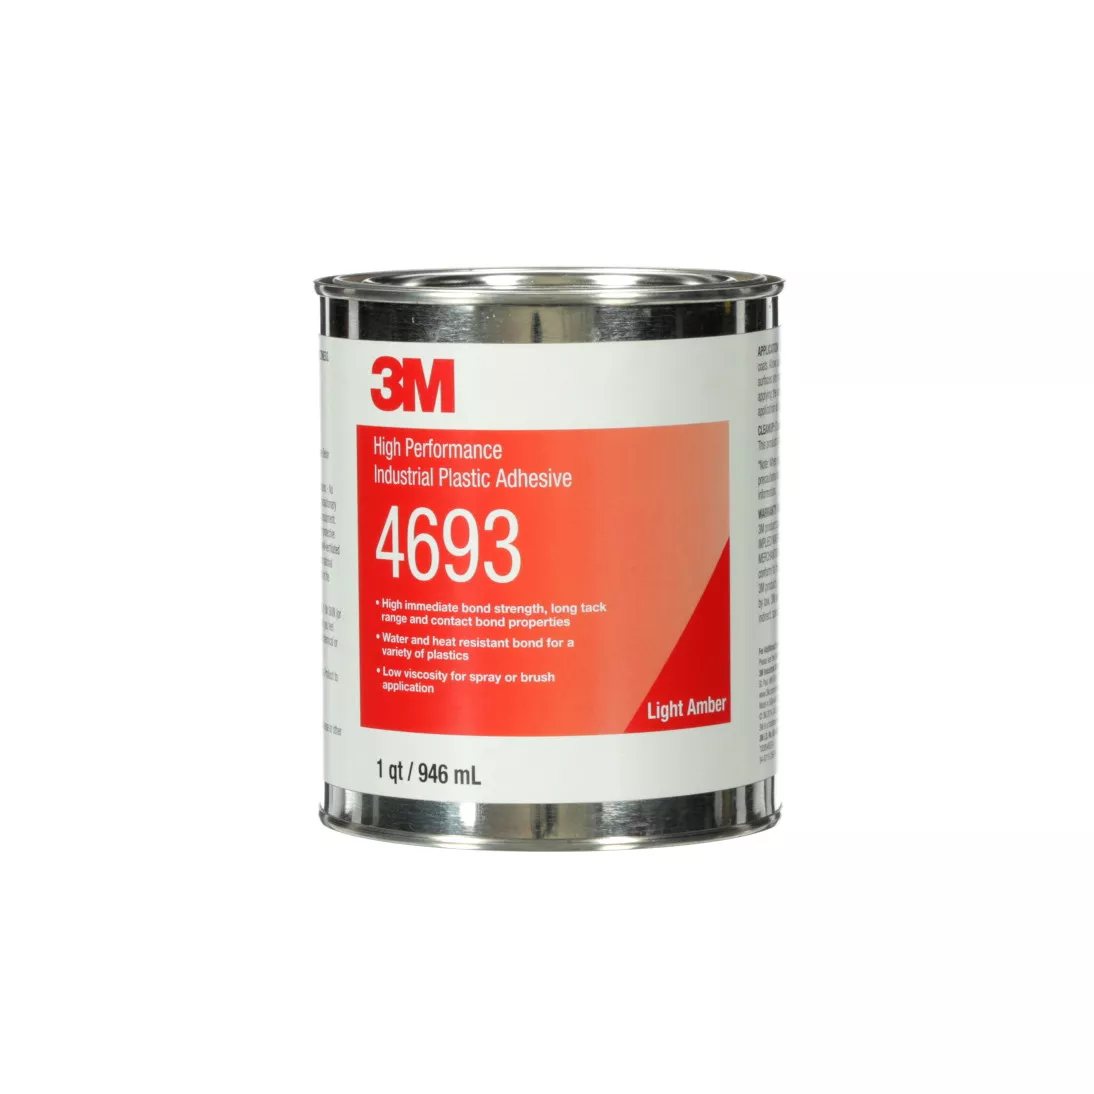 3M™ High Performance Industrial Plastic Adhesive 4693, Light Amber, 1
Quart Can, 12/case